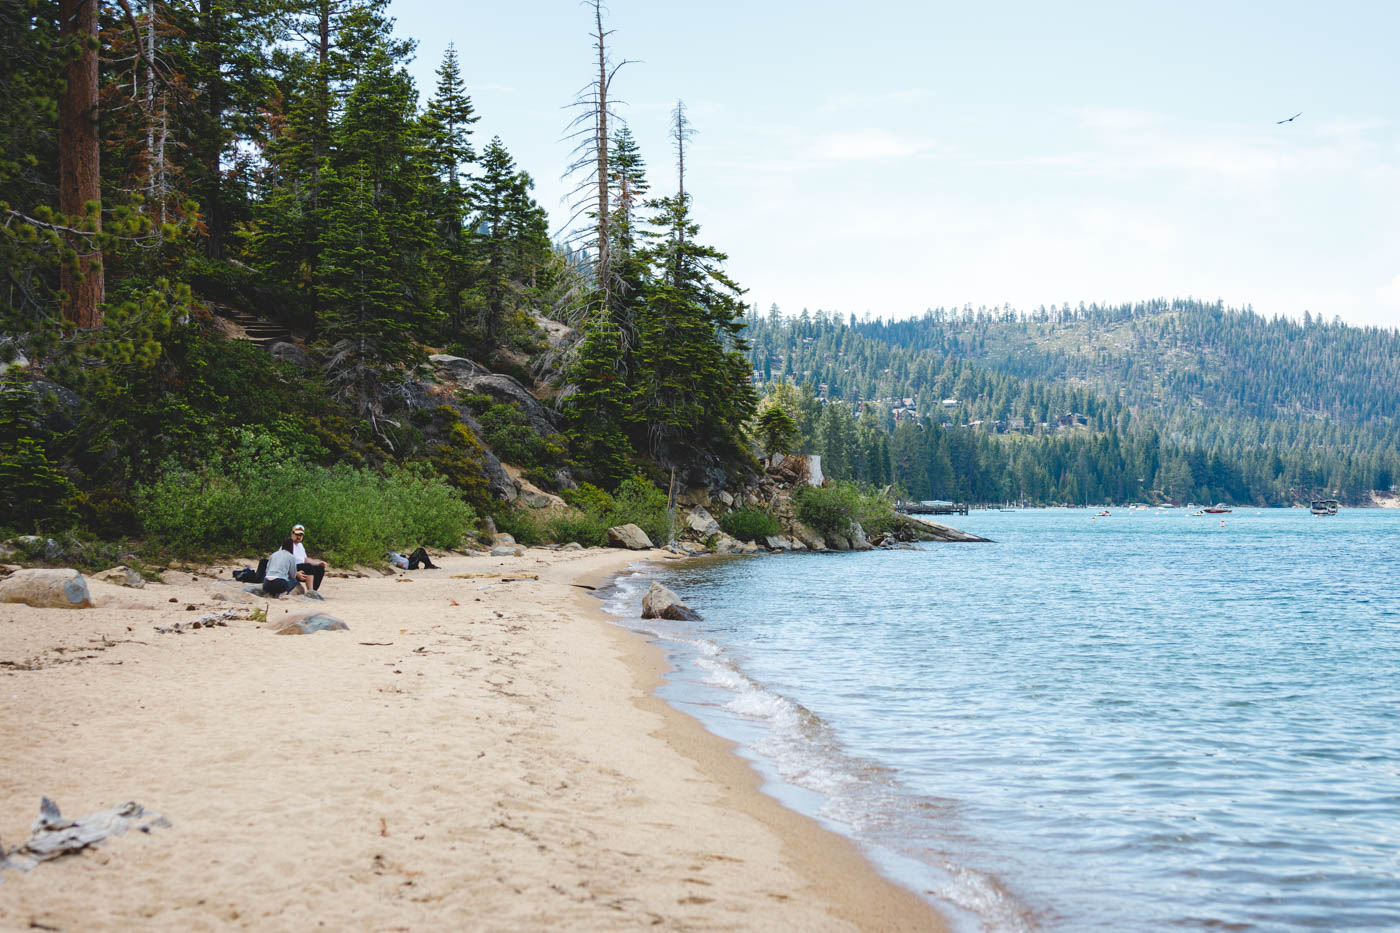 Tourists relaxing and sunbathing on an almost empty Calawee Cove Beach surrounded by pine trees.